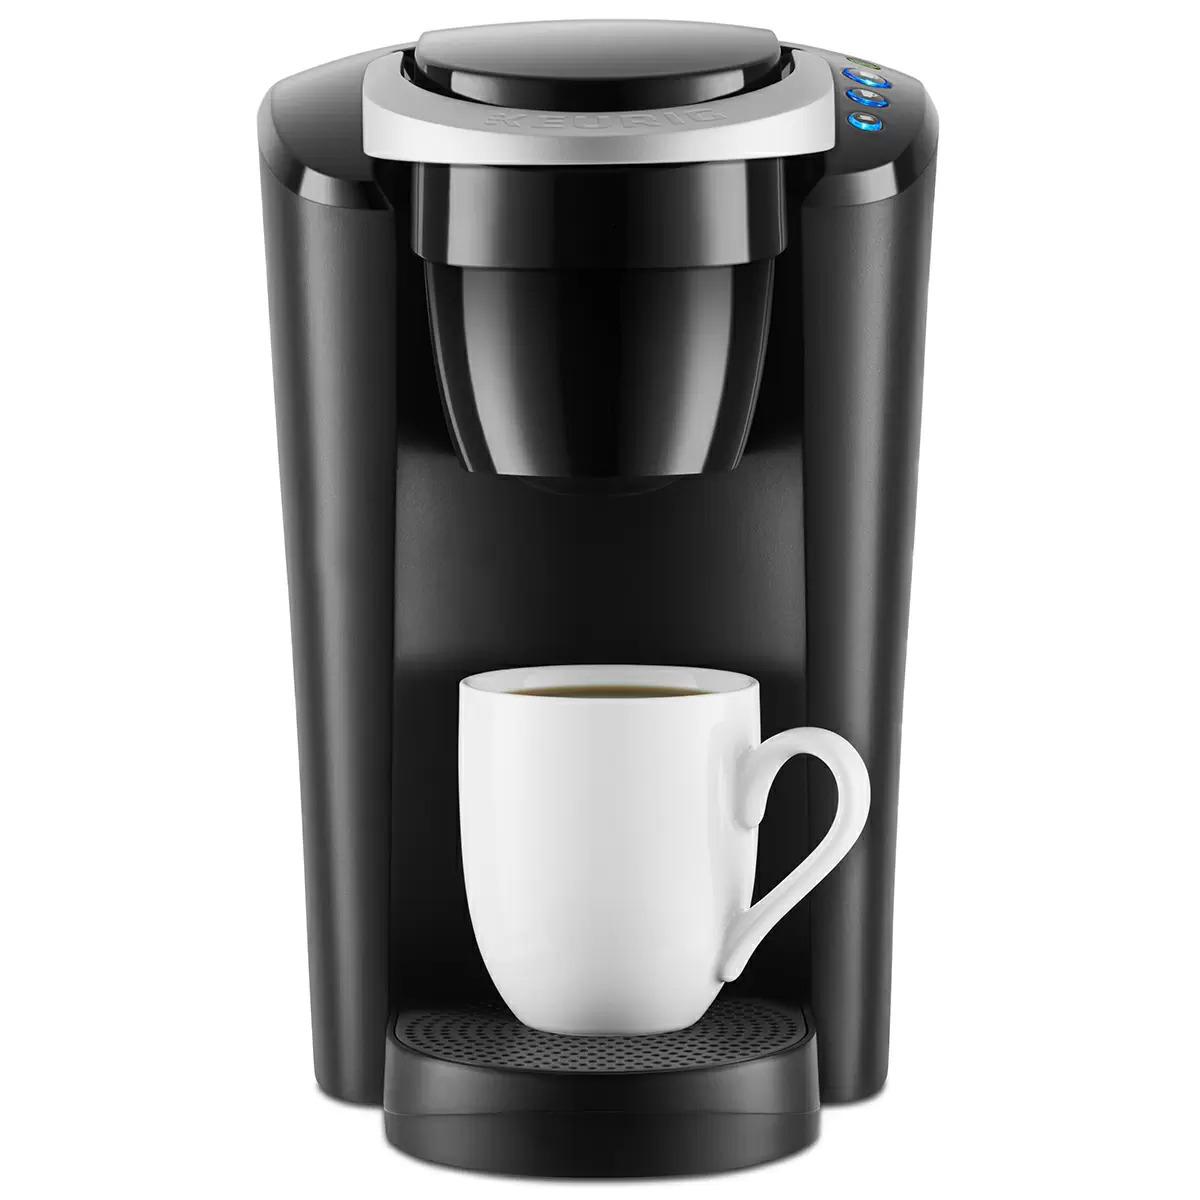 Keurig K-Compact Single-Serve K-Cup Pod Coffee Maker for $39 Shipped